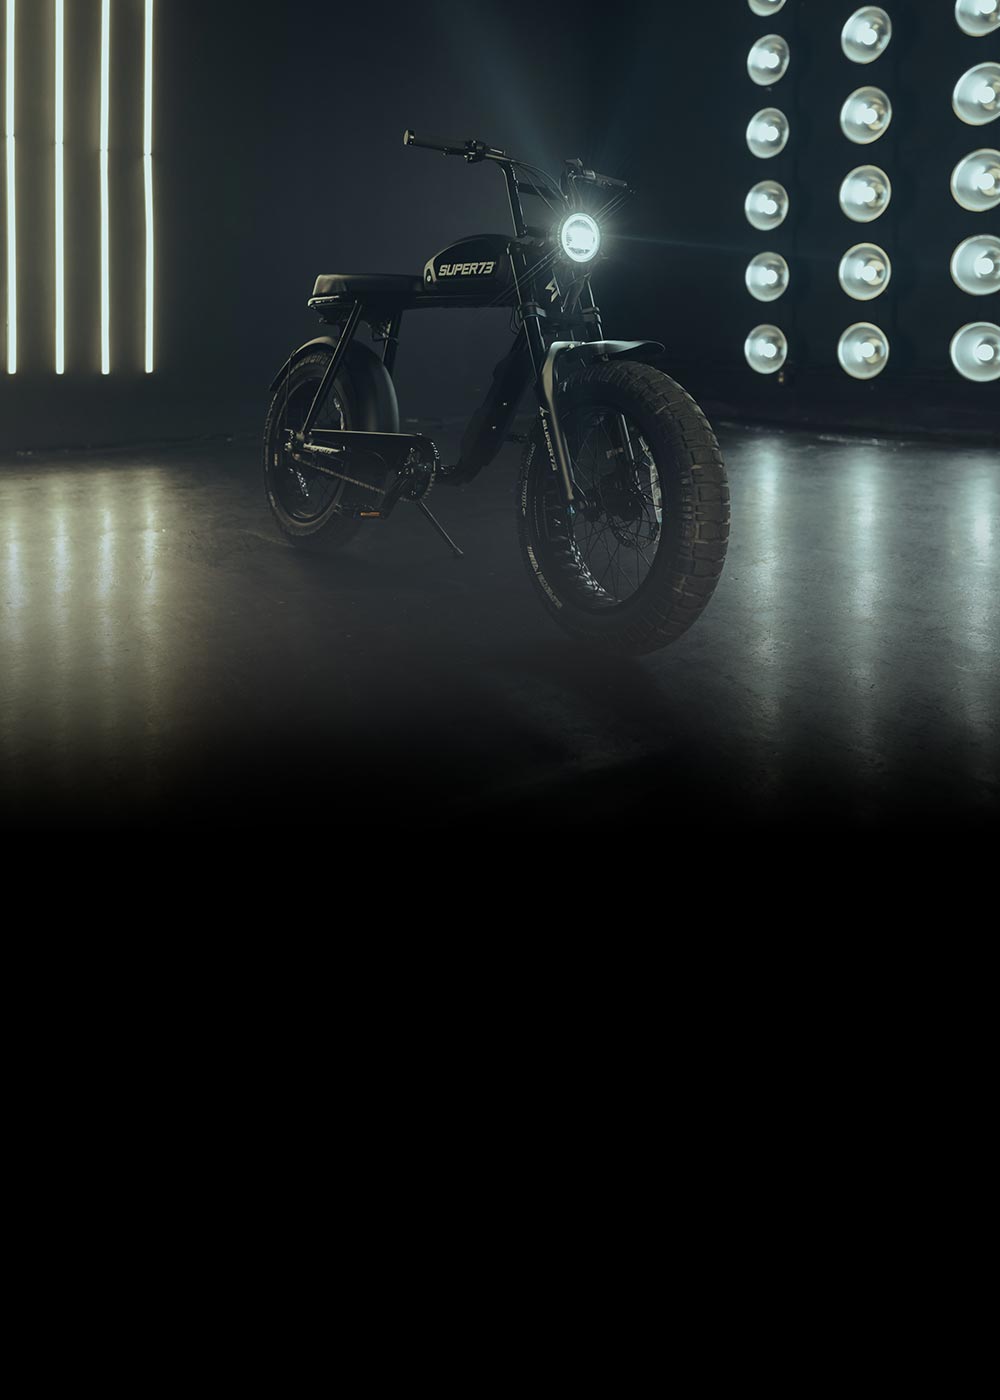 Stylized image of the S2 Obsidian with its headlight on.